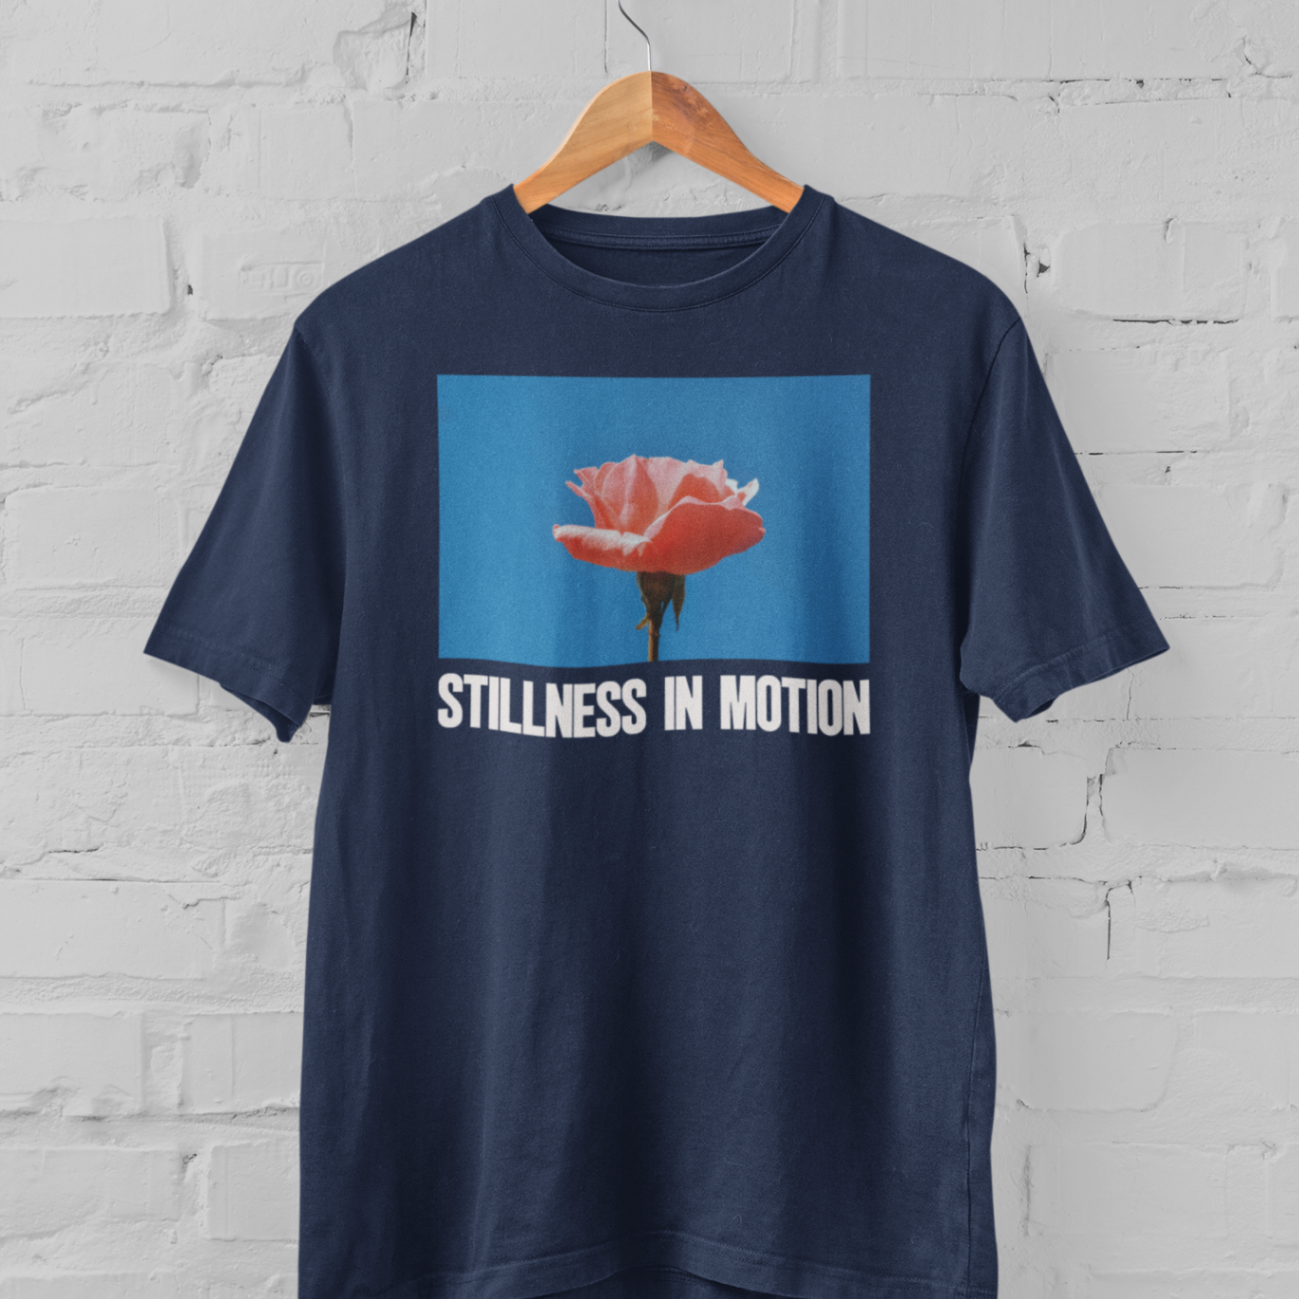 a navy tshirt with stillness in motion written in text under a pink flower over a sky blue backround